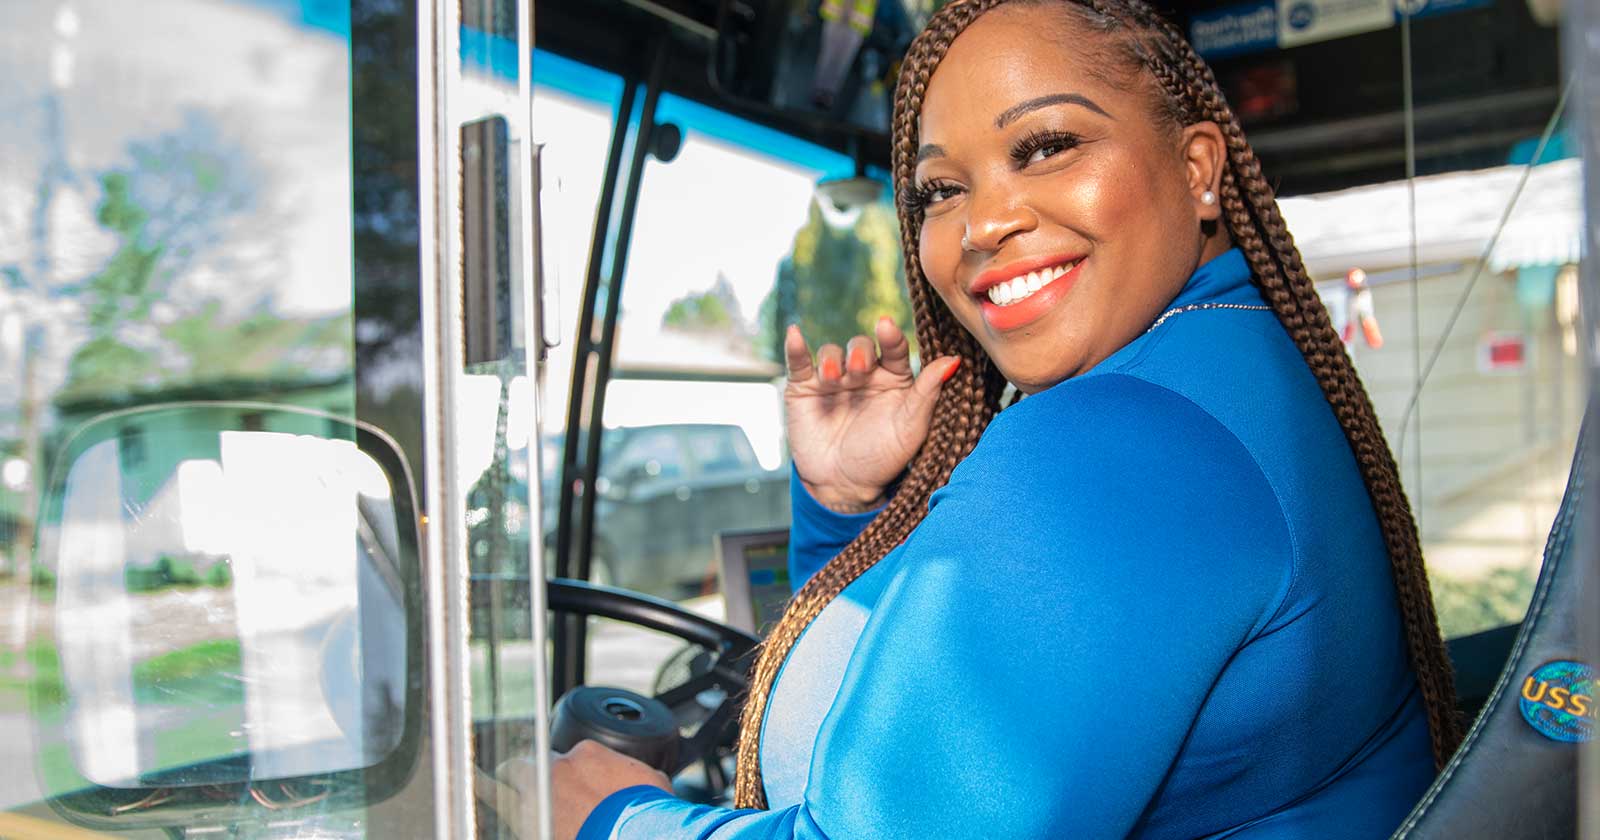 Bus operator smiling and waving